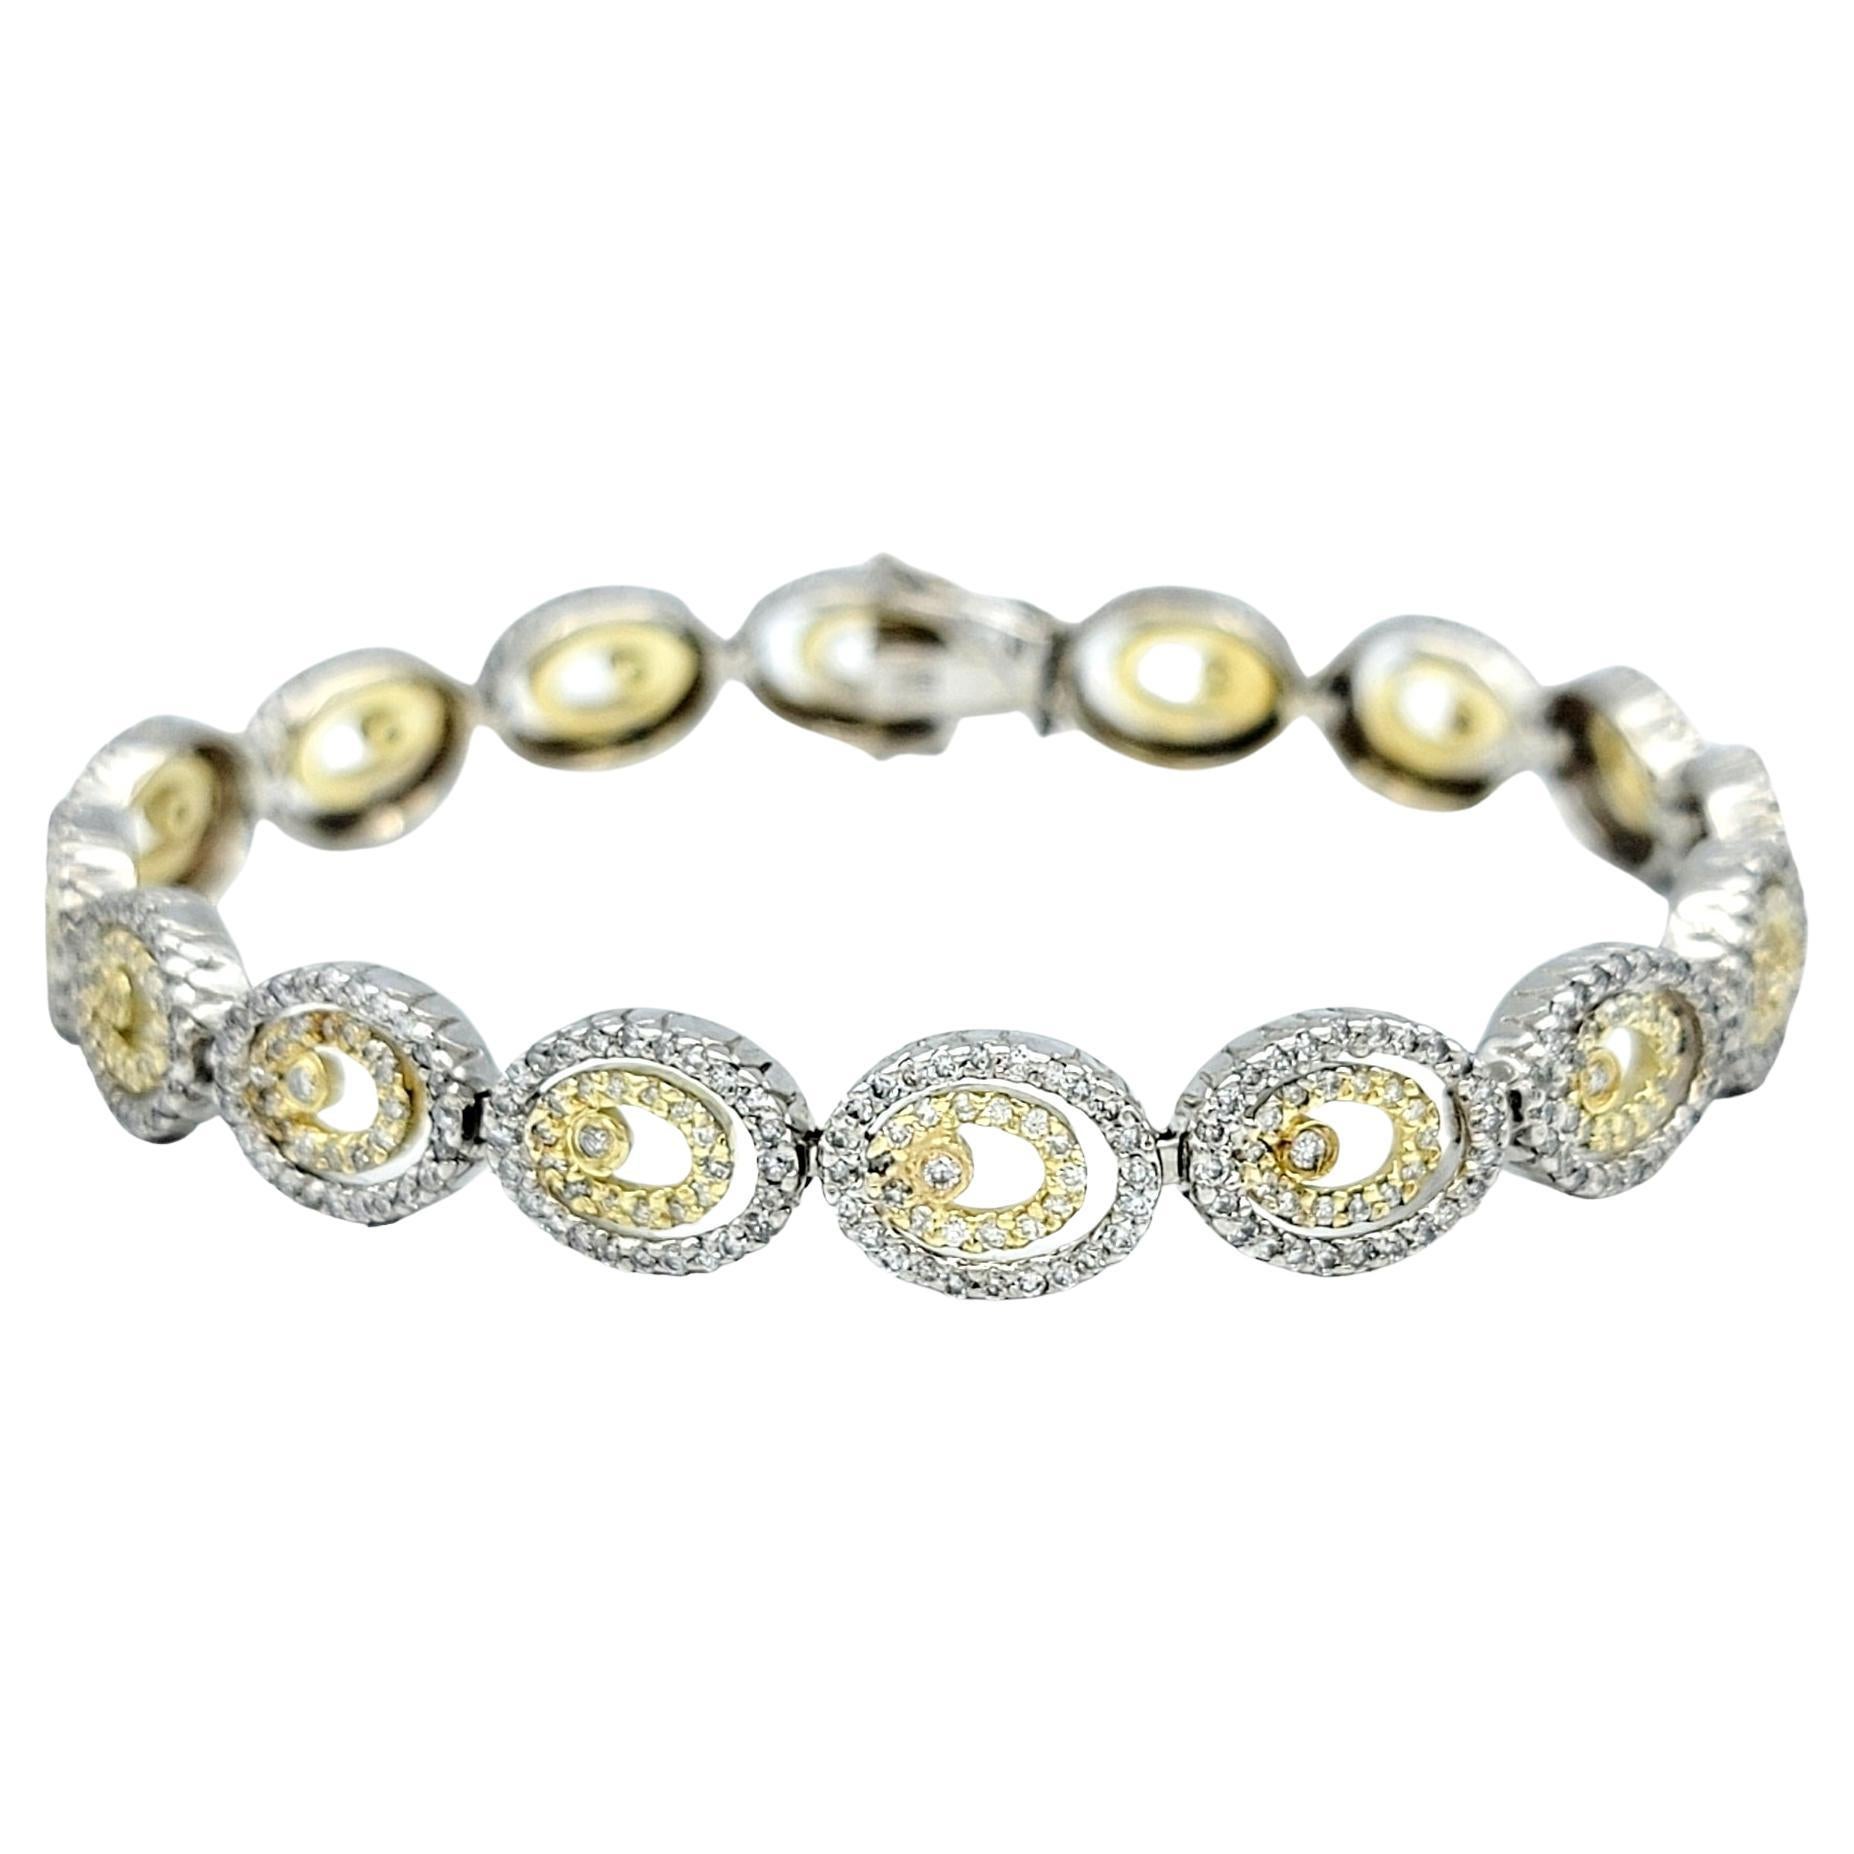 Pave Diamond Double Oval Link Bracelet in Two-Tone 14K White and Yellow Gold